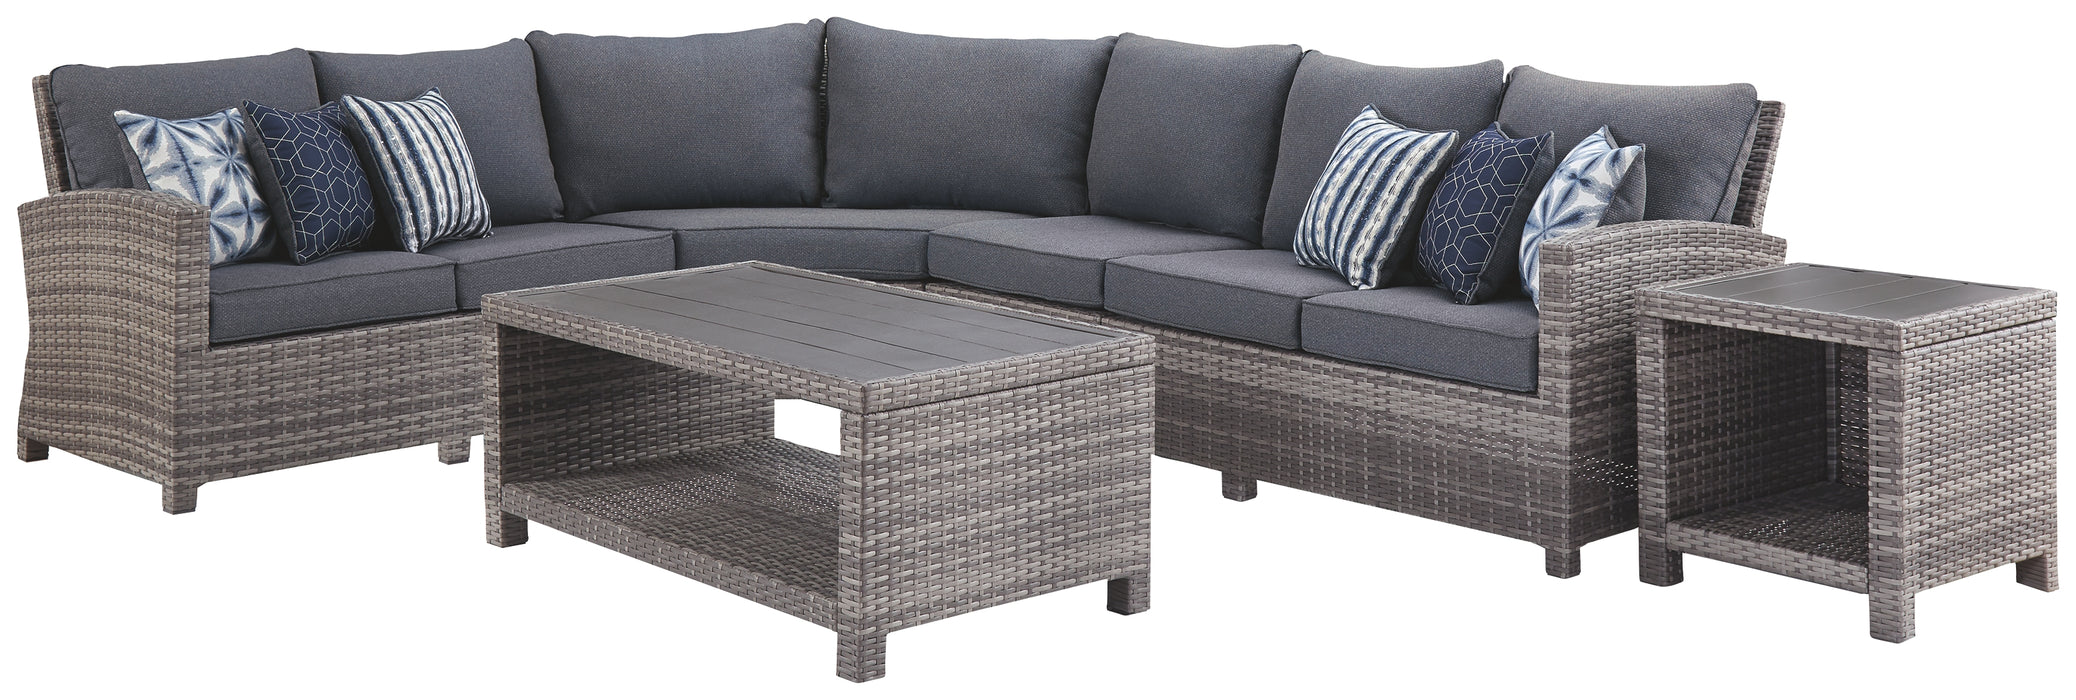 Salem Beach Signature Design By Ashley 6-Piece Outdoor Sectional with Occasional Tables Set